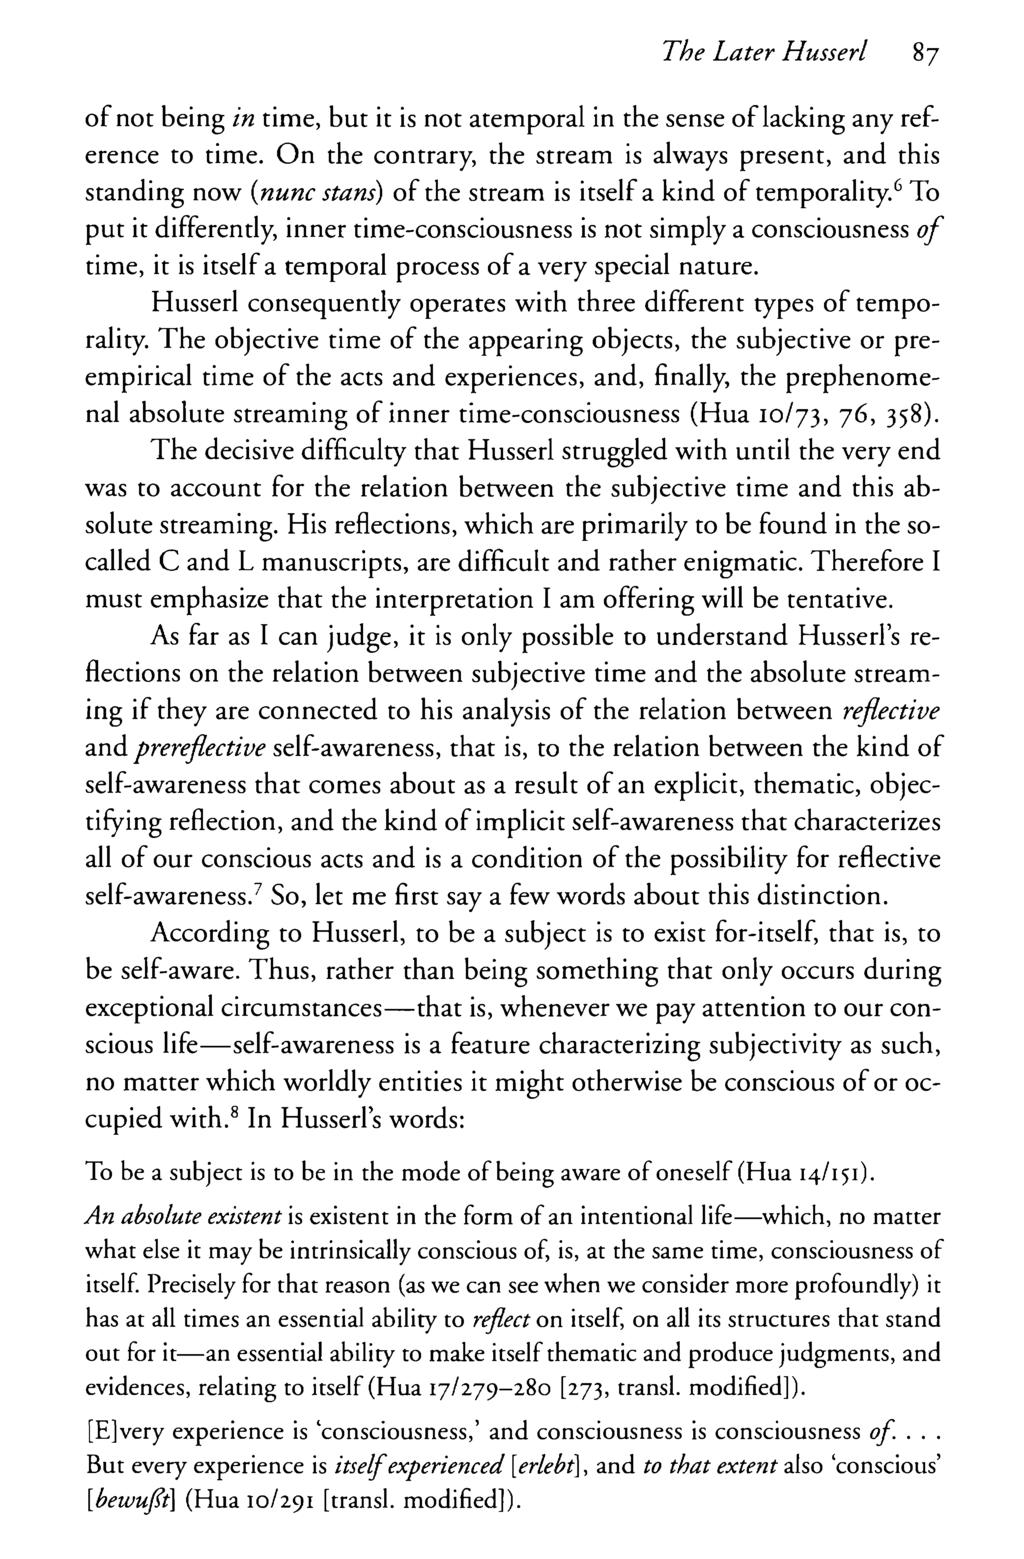 The Later Husserl 87 of not being in time, but it is not atemporal in the sense of lacking any reference to time.